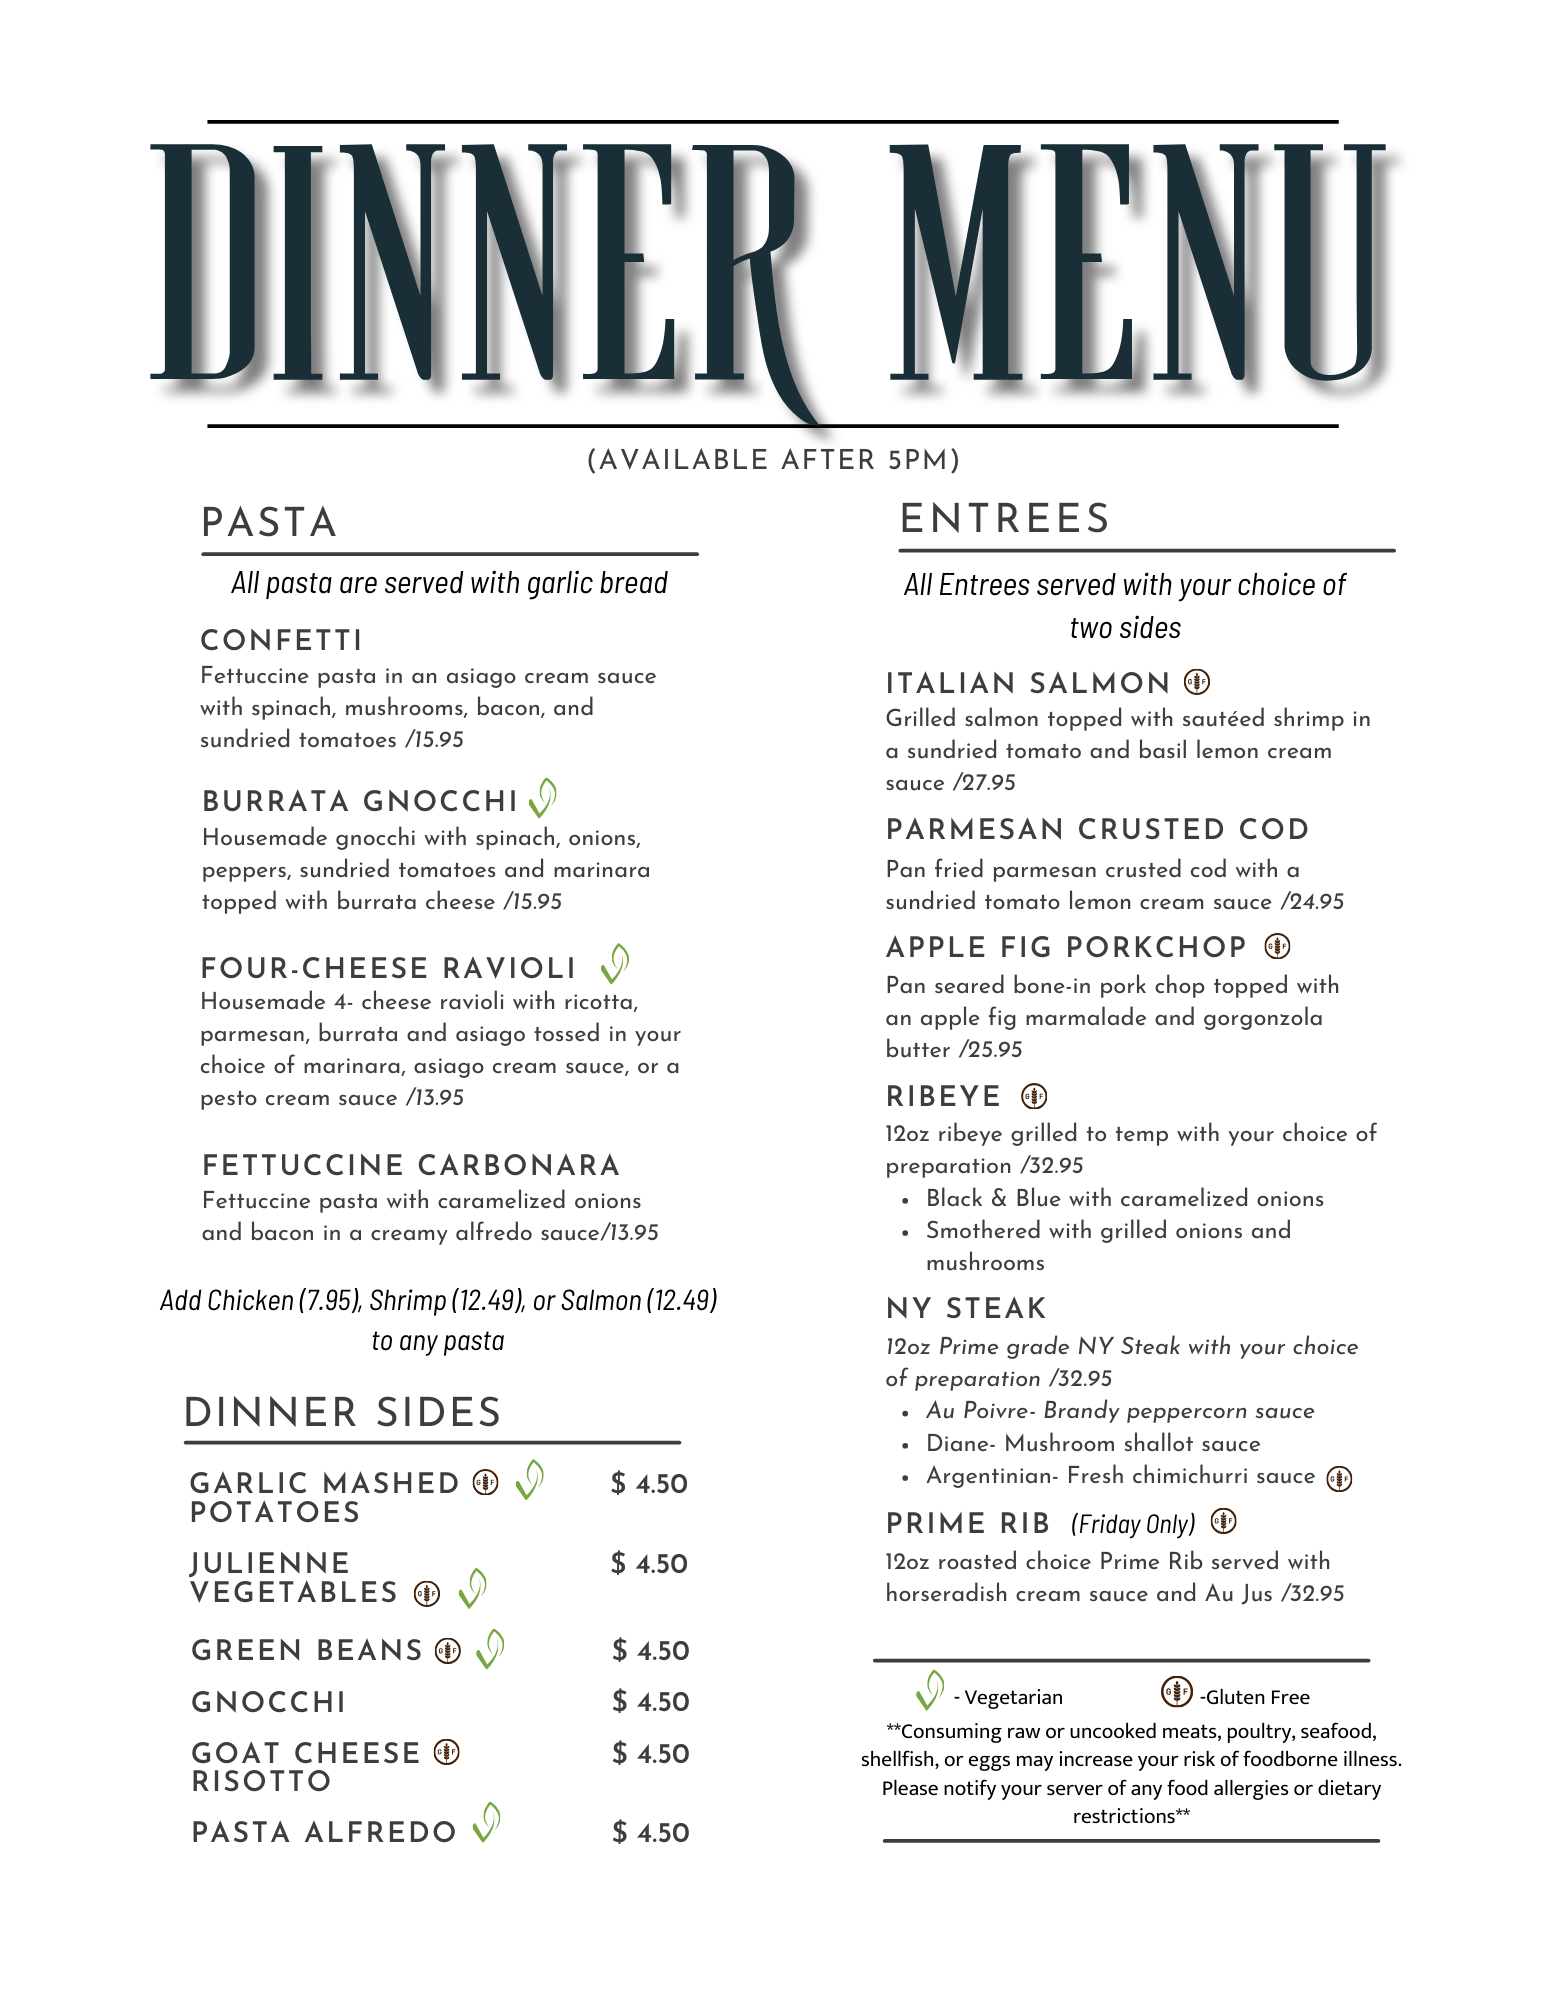 Dinner Menu - served after 5 PM daily